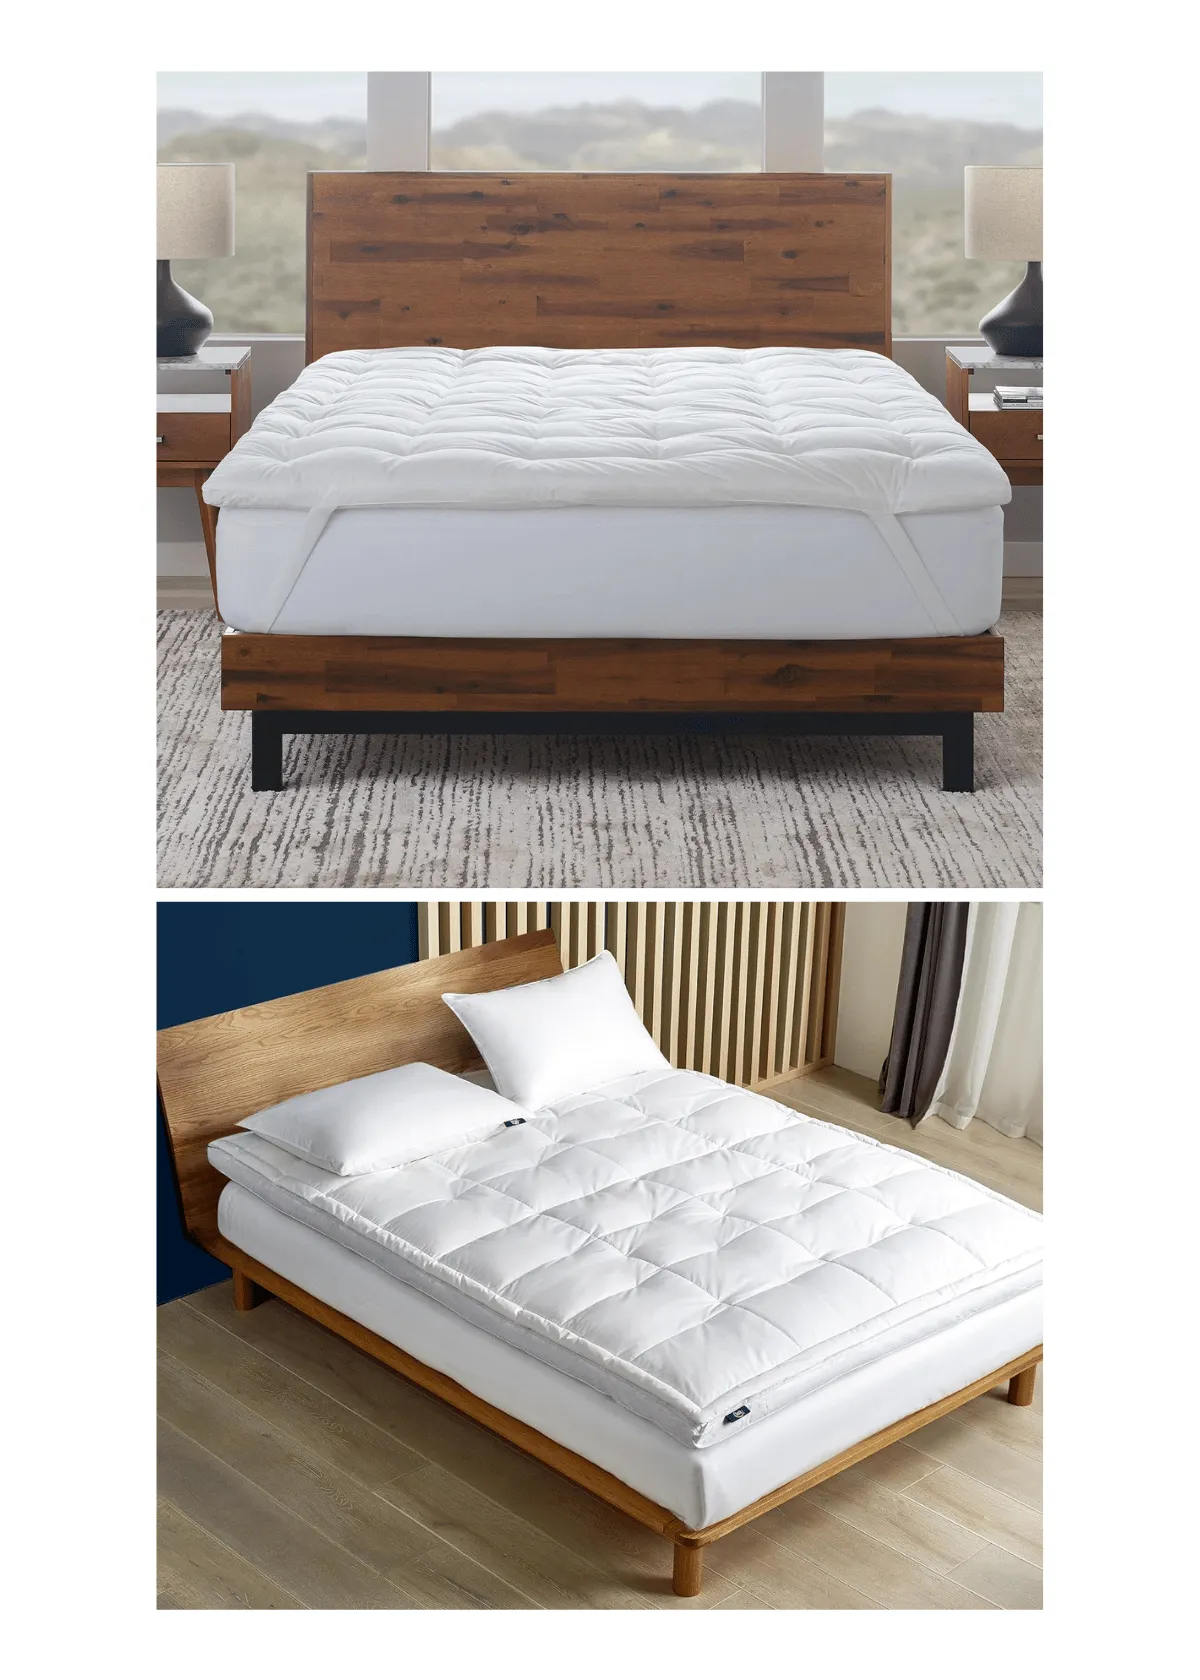 "Feather Mattress Topper: Quality, Comfort & Value Reviewed"